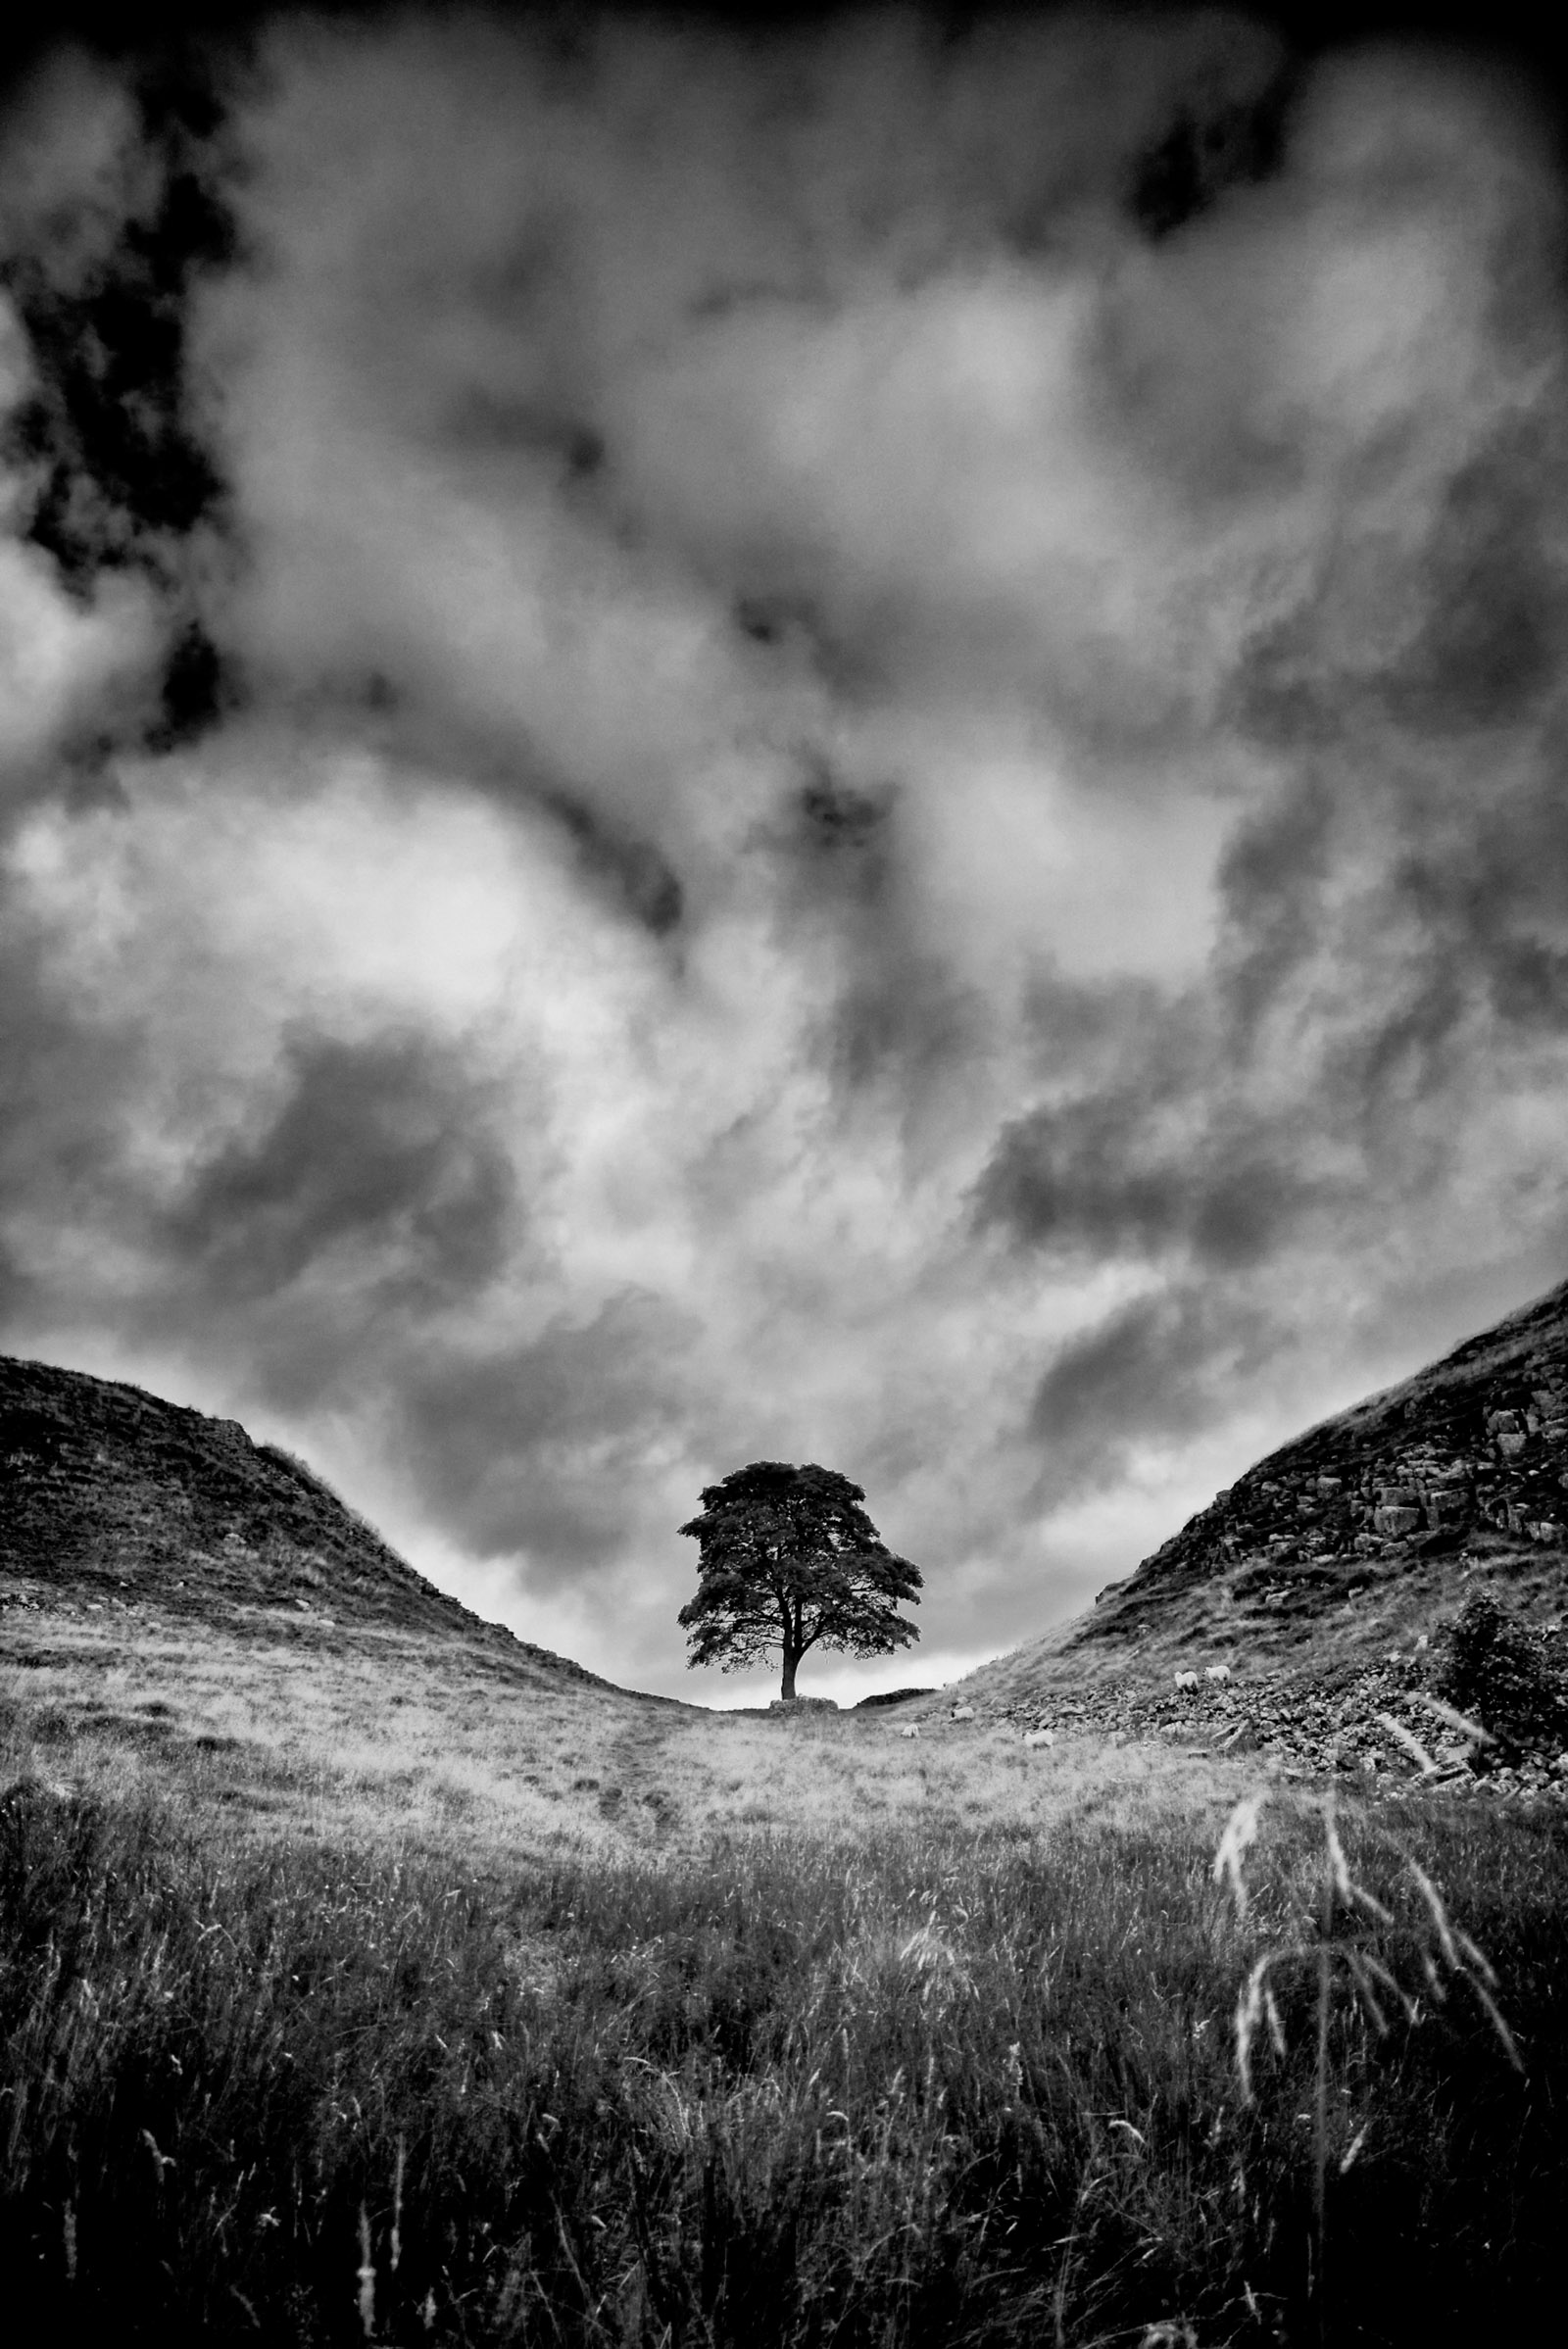 The sycamore tree (Acer pseudoplatanus) at Sycamore Gap, Hadrian’s Wall, Northumberland, England; photograph by Rory Garforth